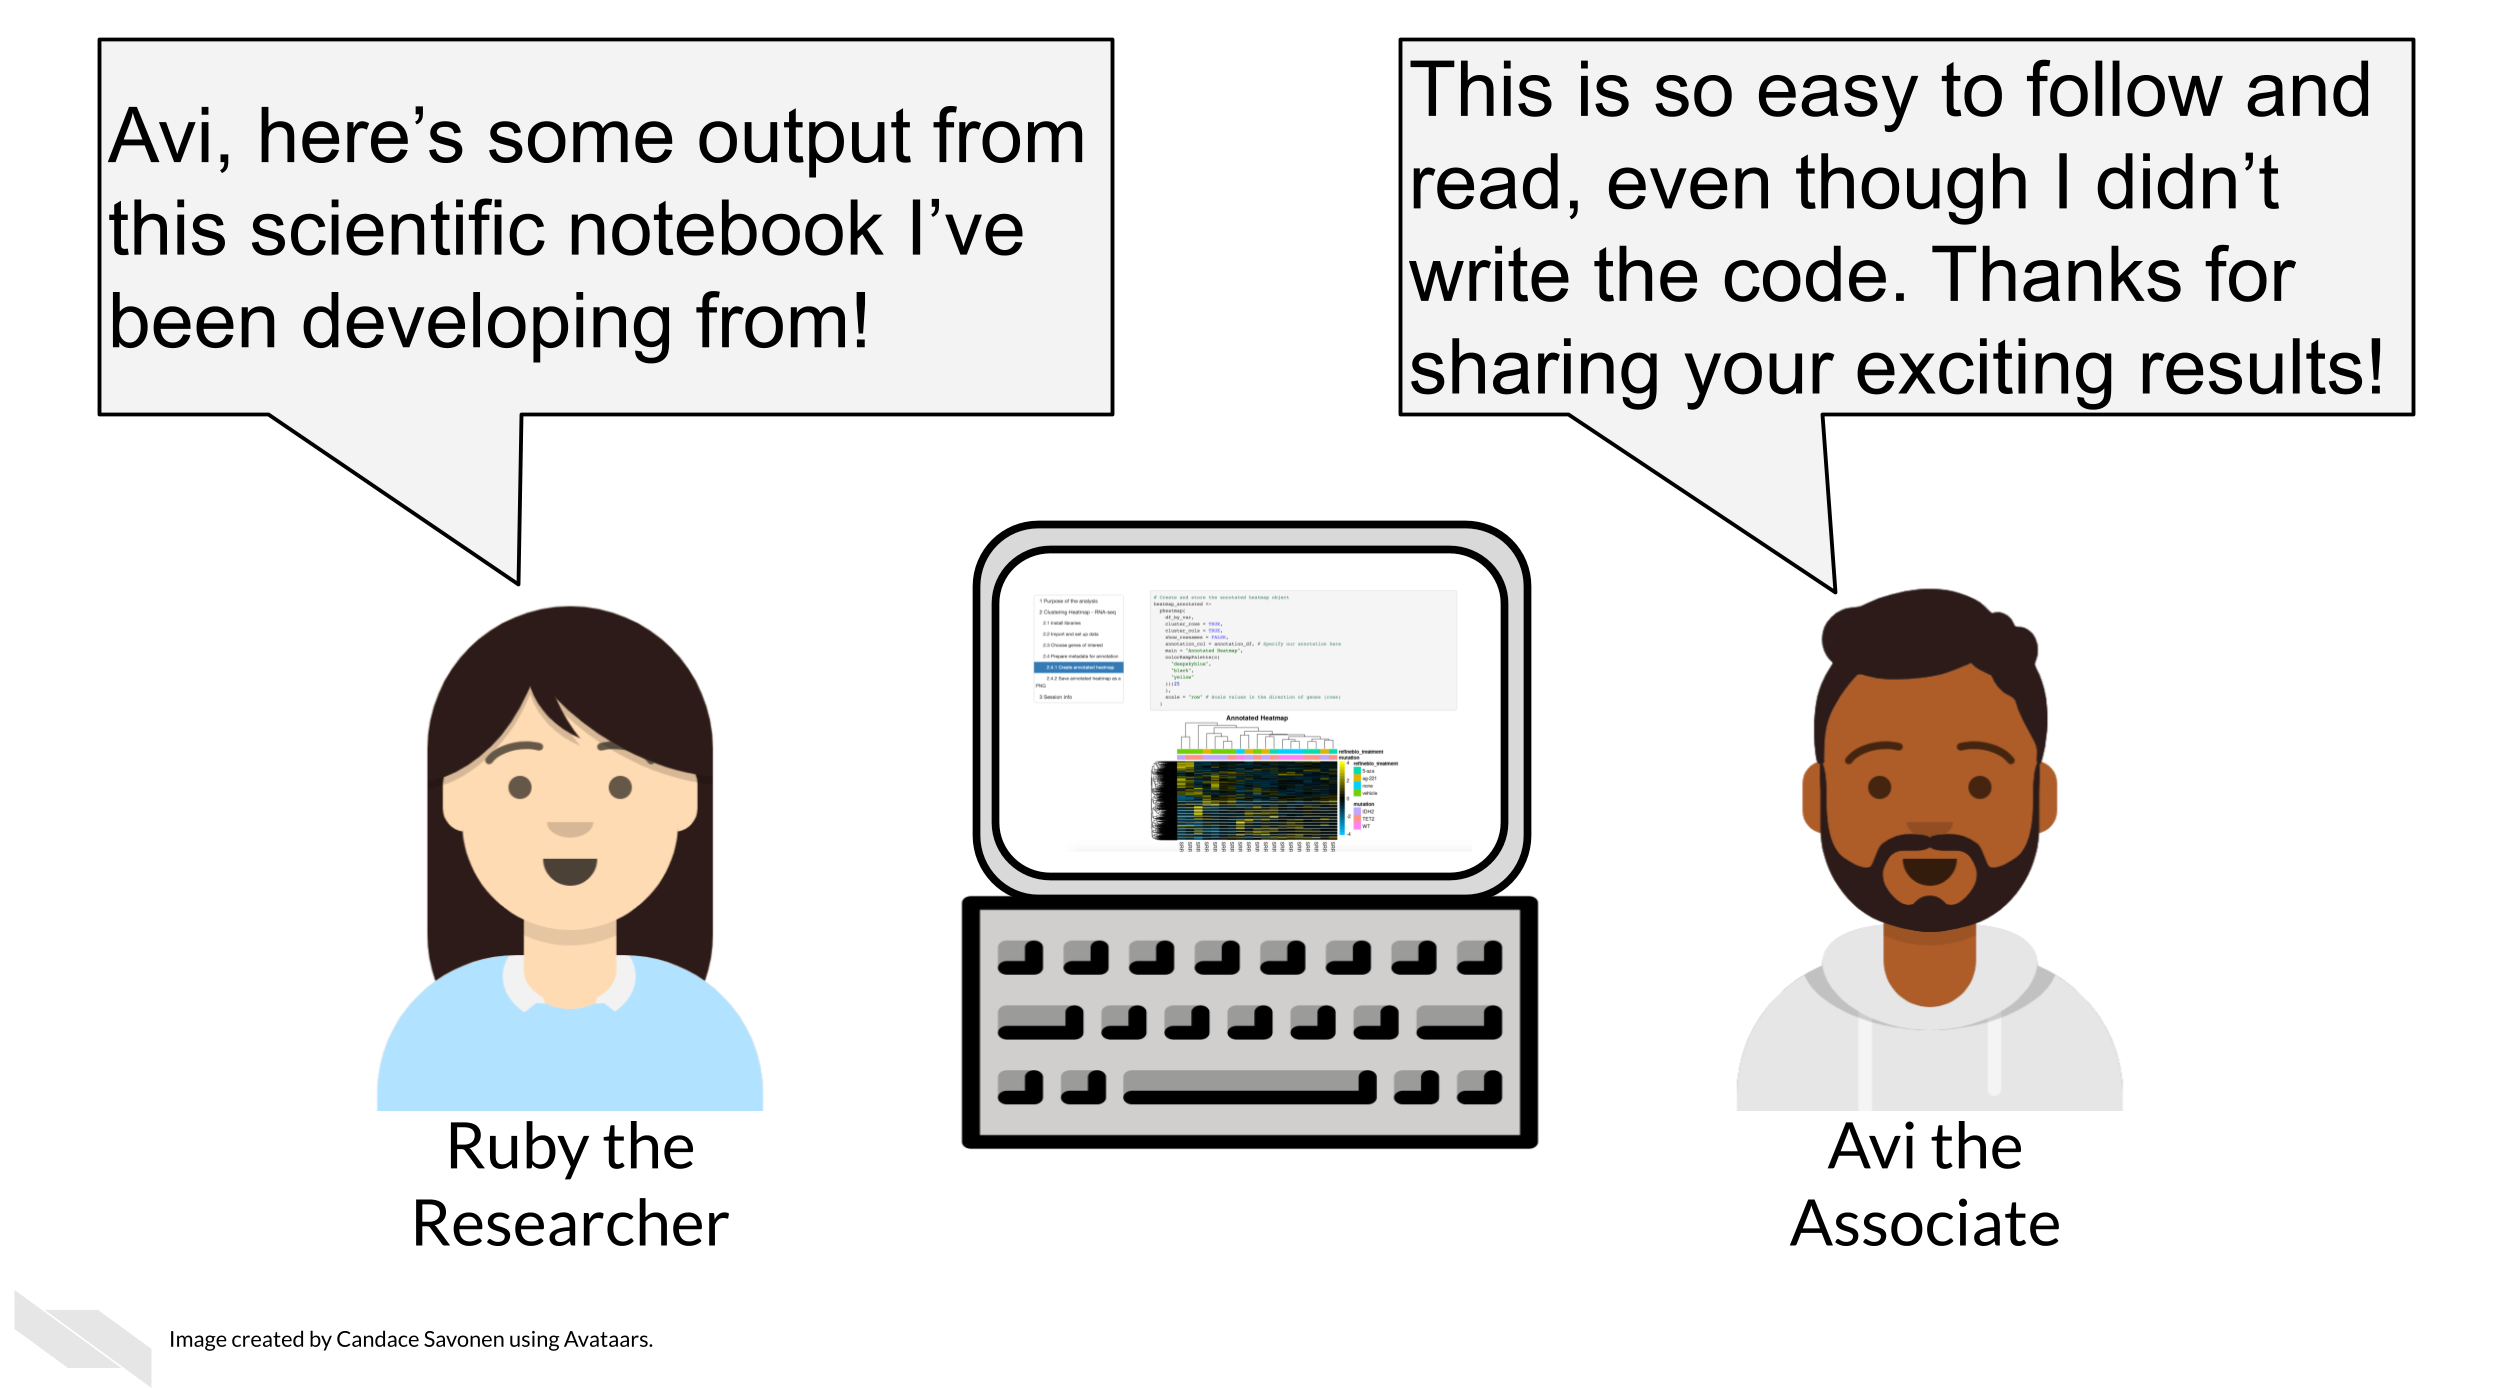 Ruby the researcher has her computer showing her notebook. Ruby says ‘Avi, here’s some output from this scientific notebook I’ve been developing from!’ Avi the associate says ‘This is so easy to follow and read, even though I didn’t write the code. Thanks for sharing your exciting results!’